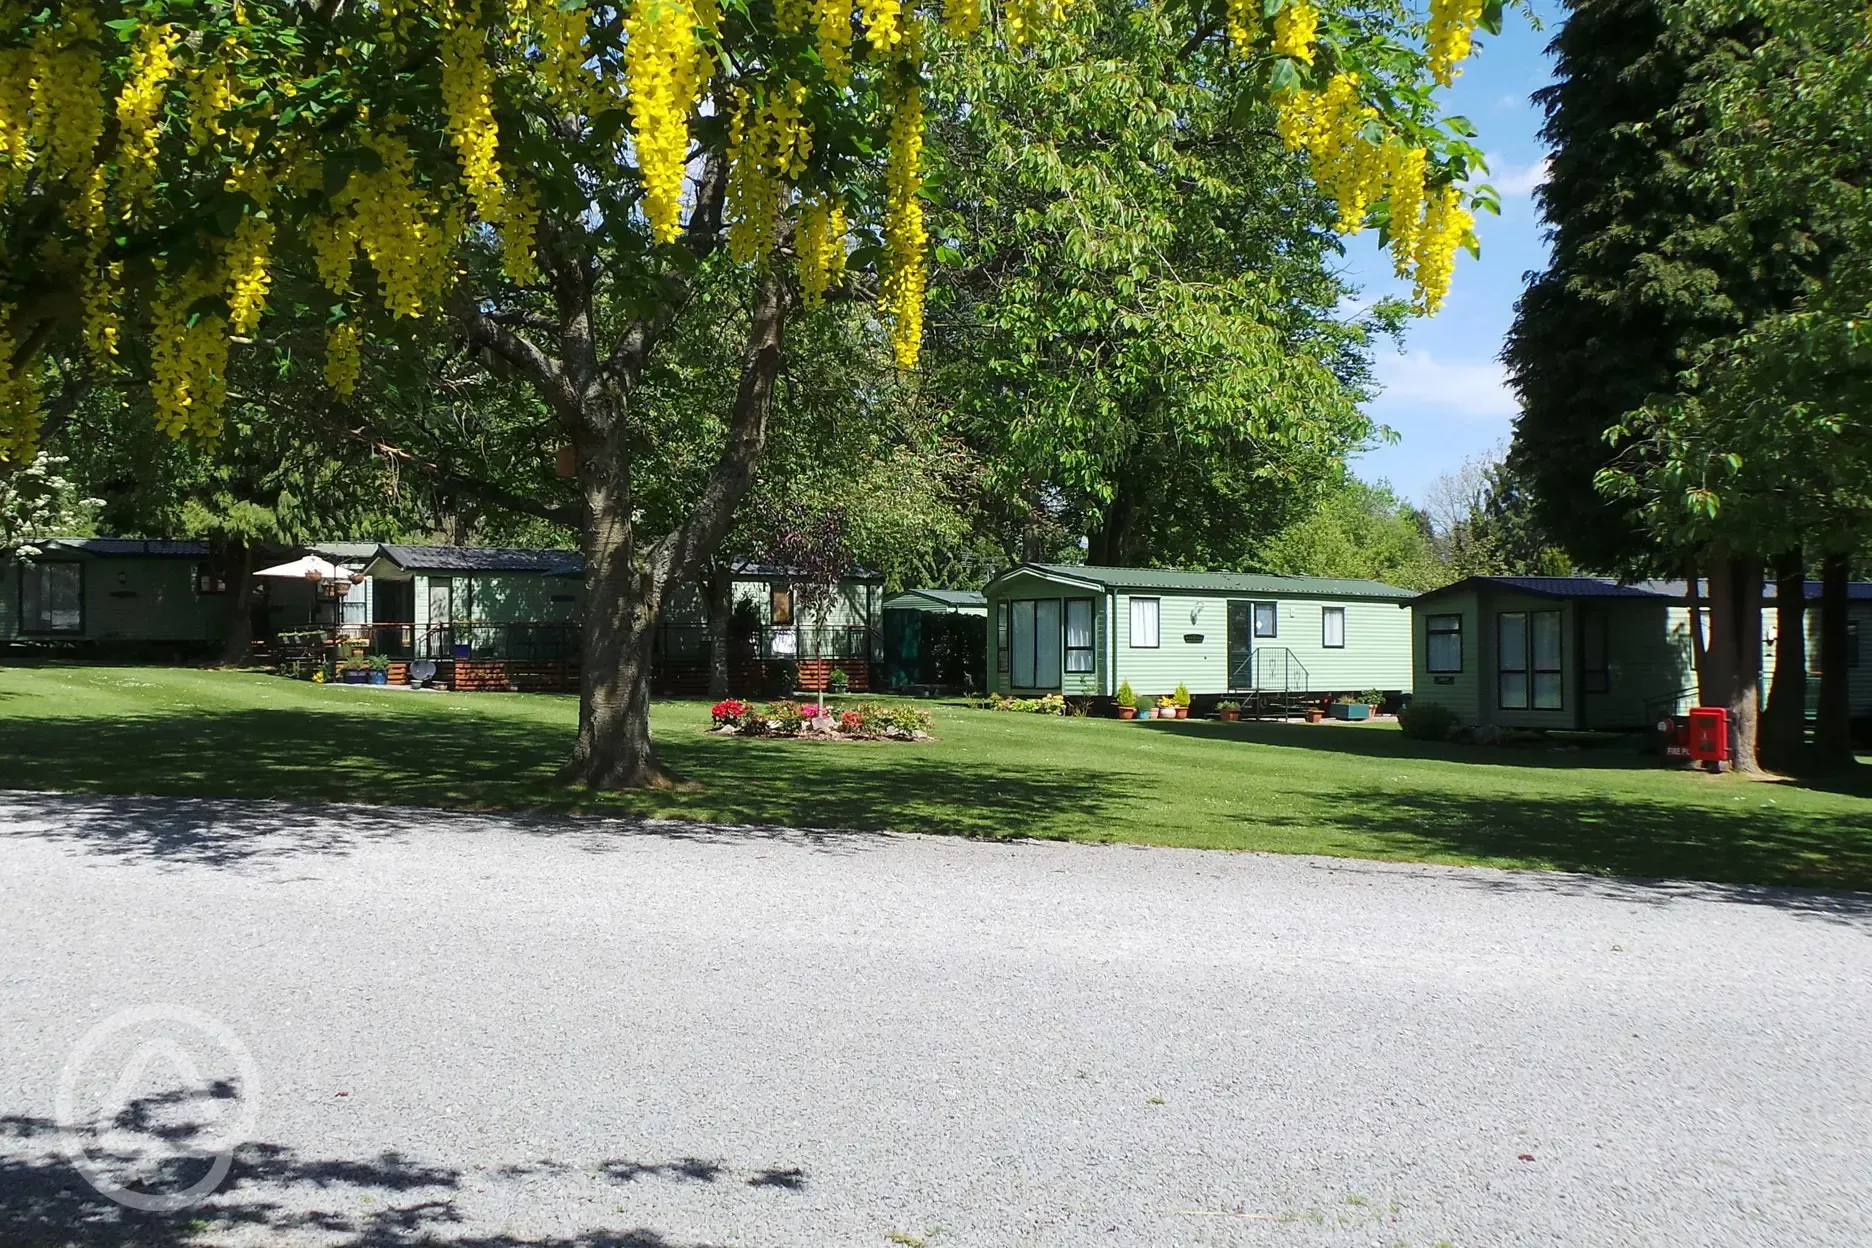 Holiday Homes in the last section of the Park